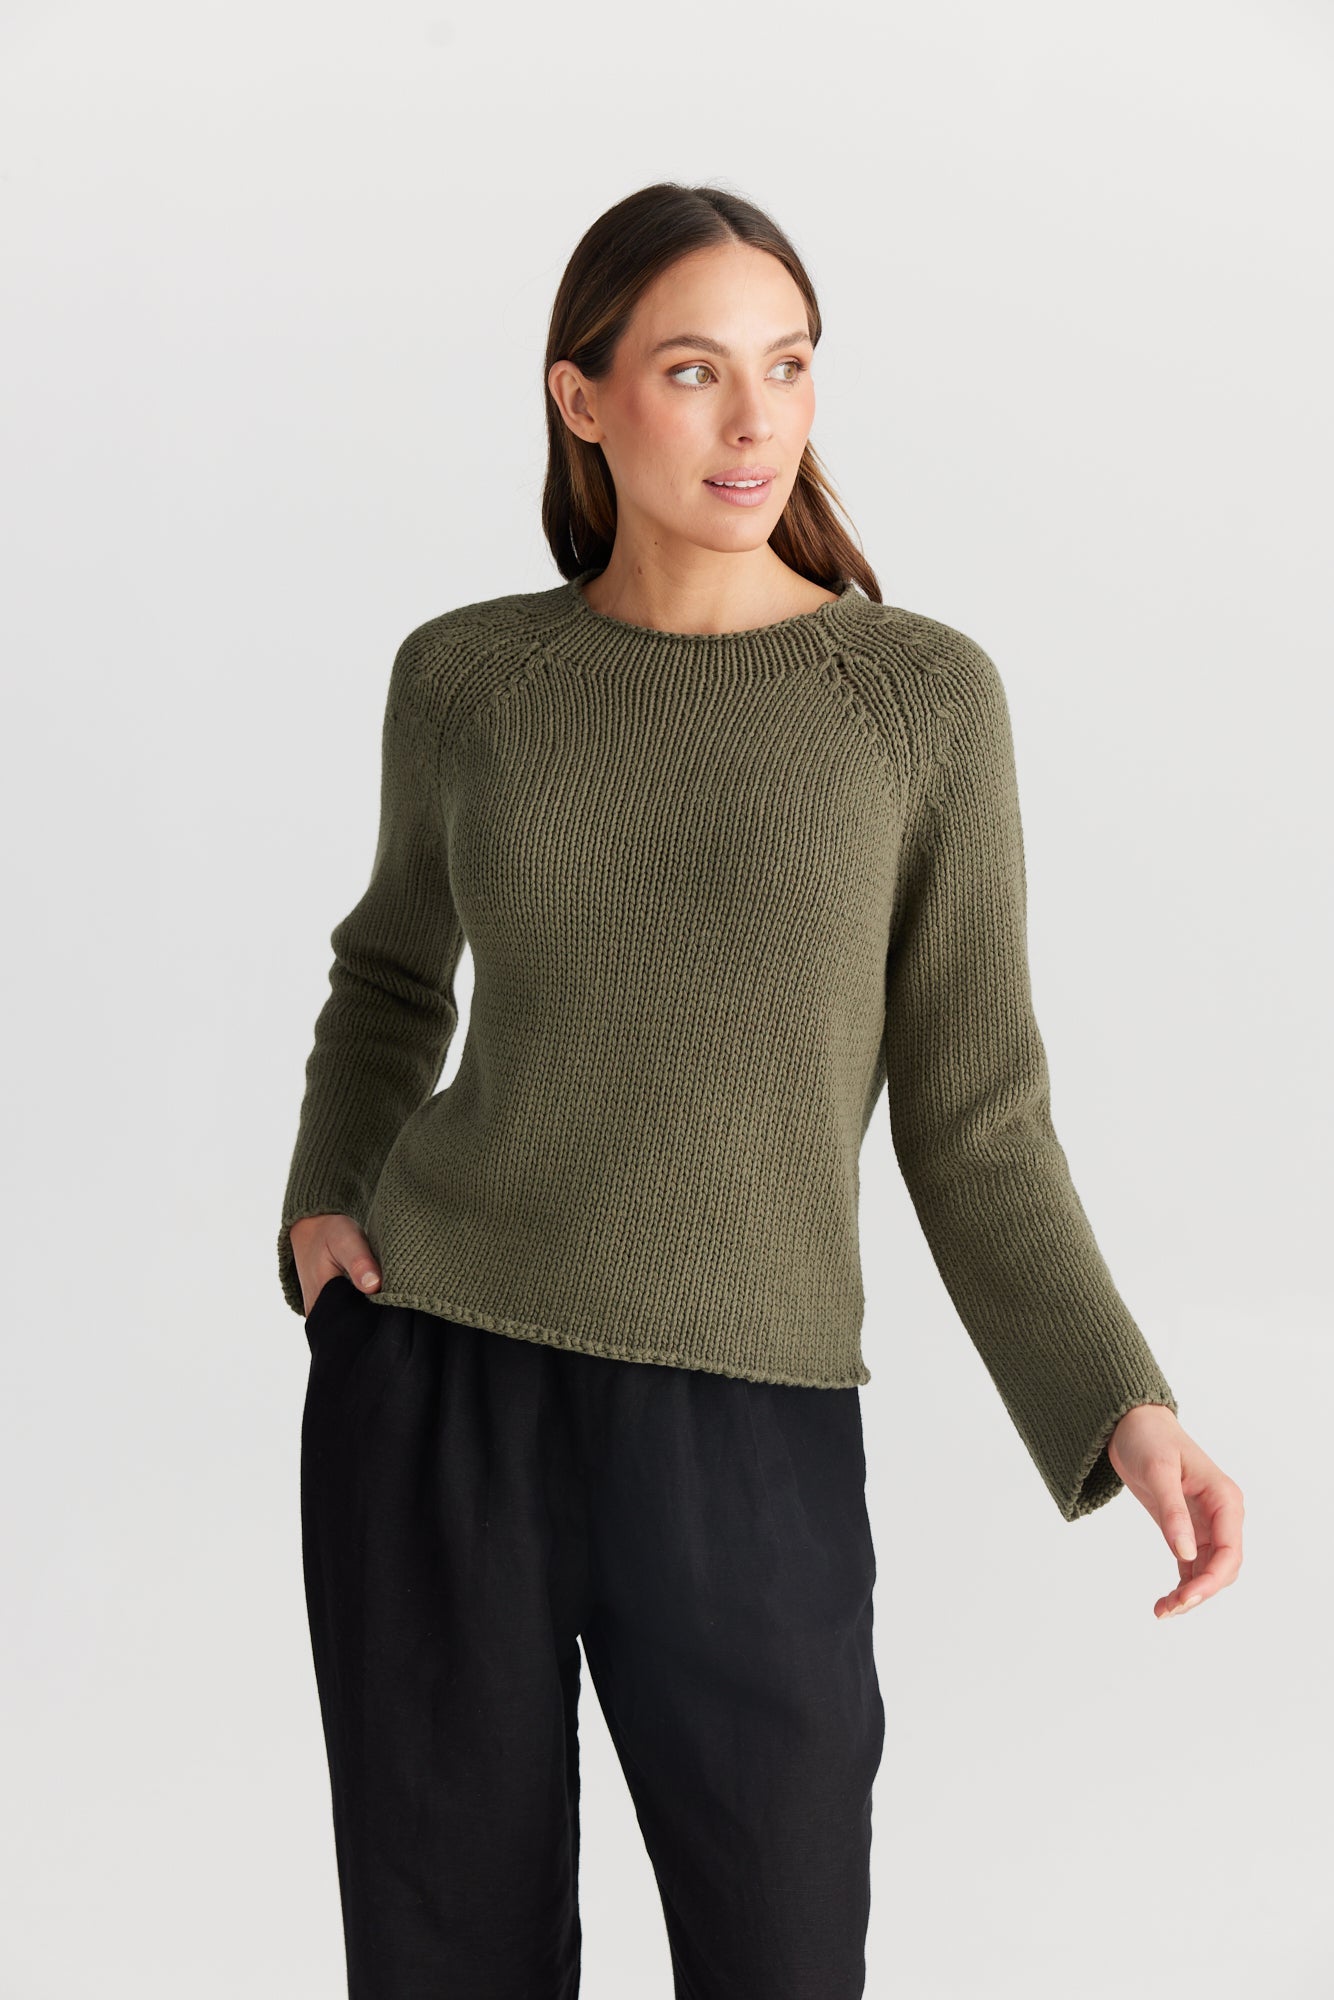 Esse Knit - Olive-Knitwear & Jumpers-The Shanty Corporation-The Bay Room